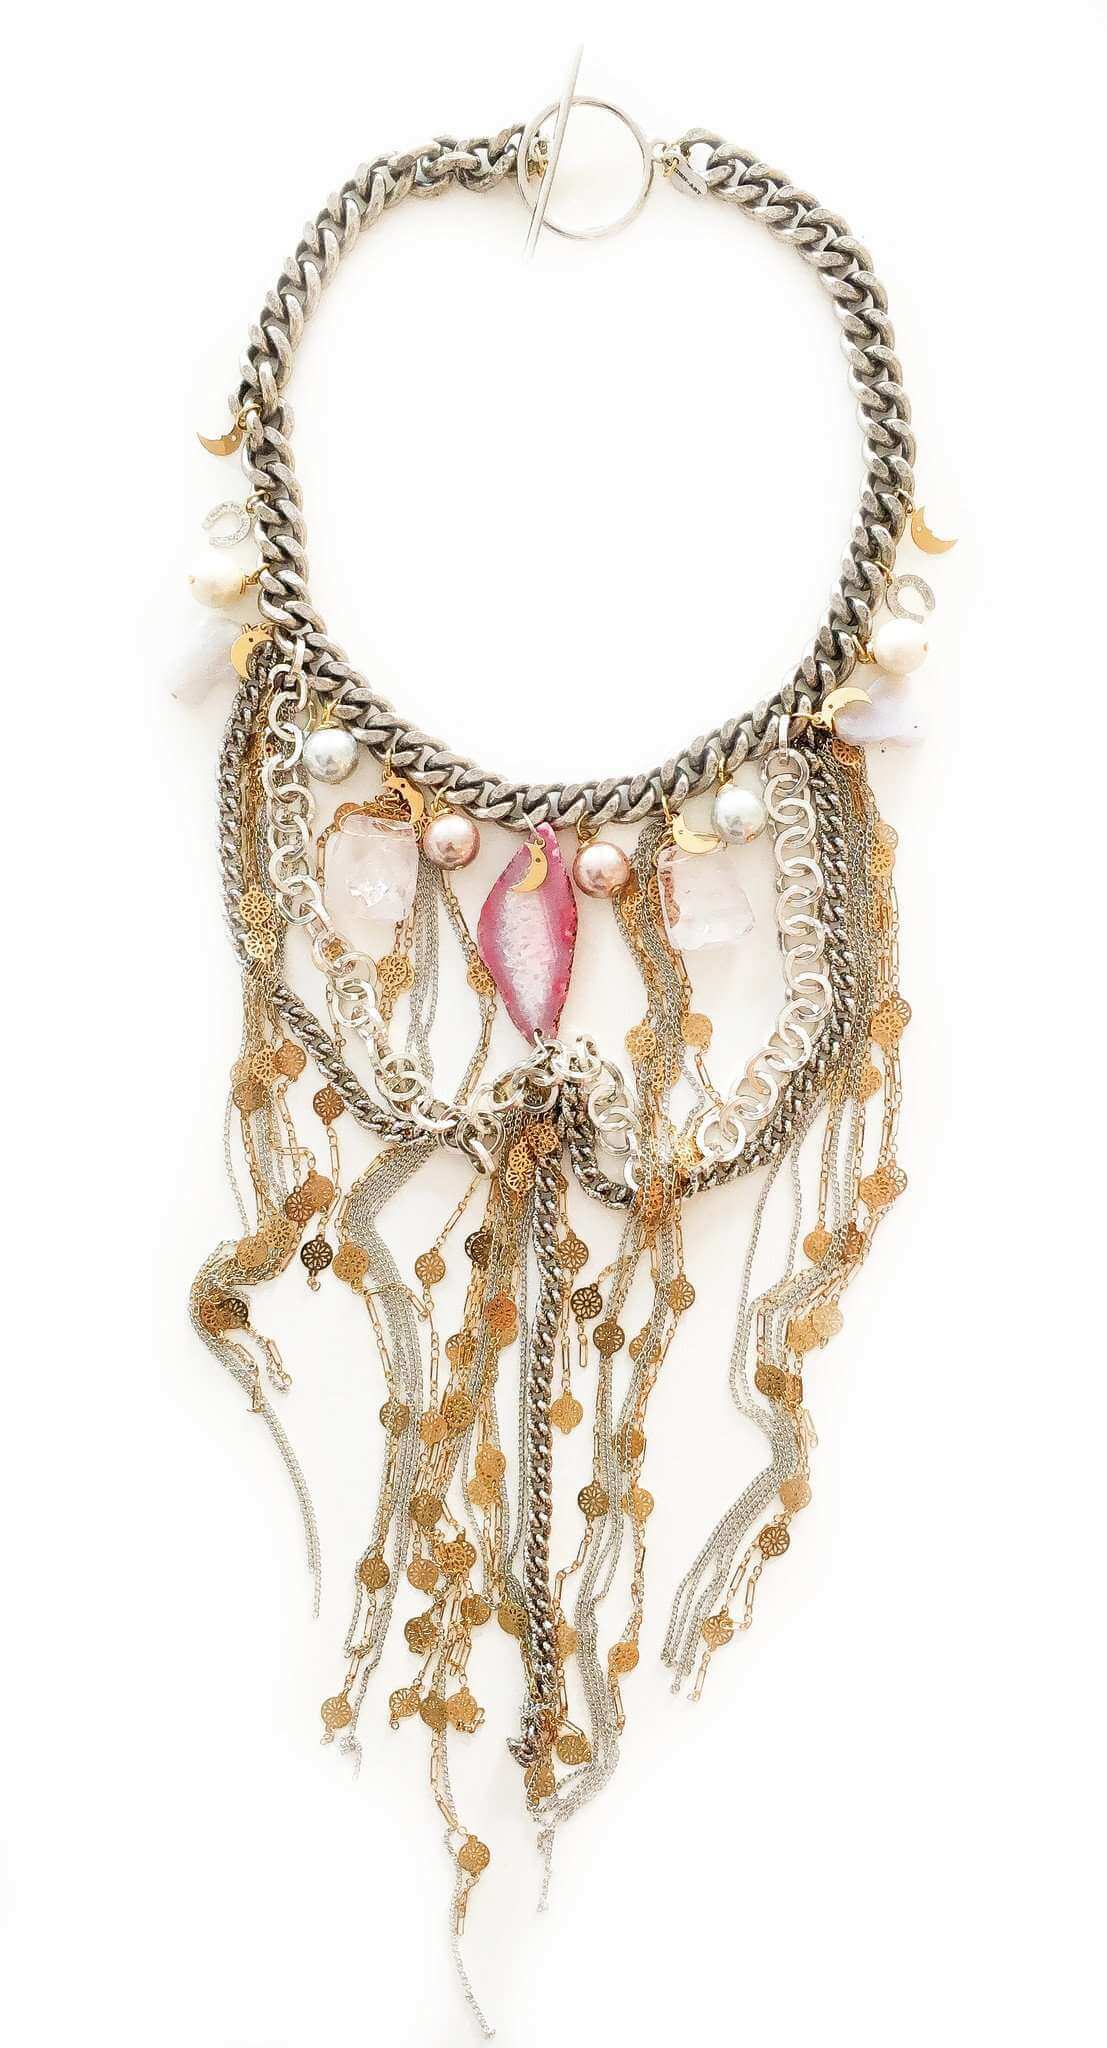 Fringe necklace with pink agate, rose quartz, calcedony, pearls and charms. Perfect for parties, summer time and gift for her. - Maiden-Art